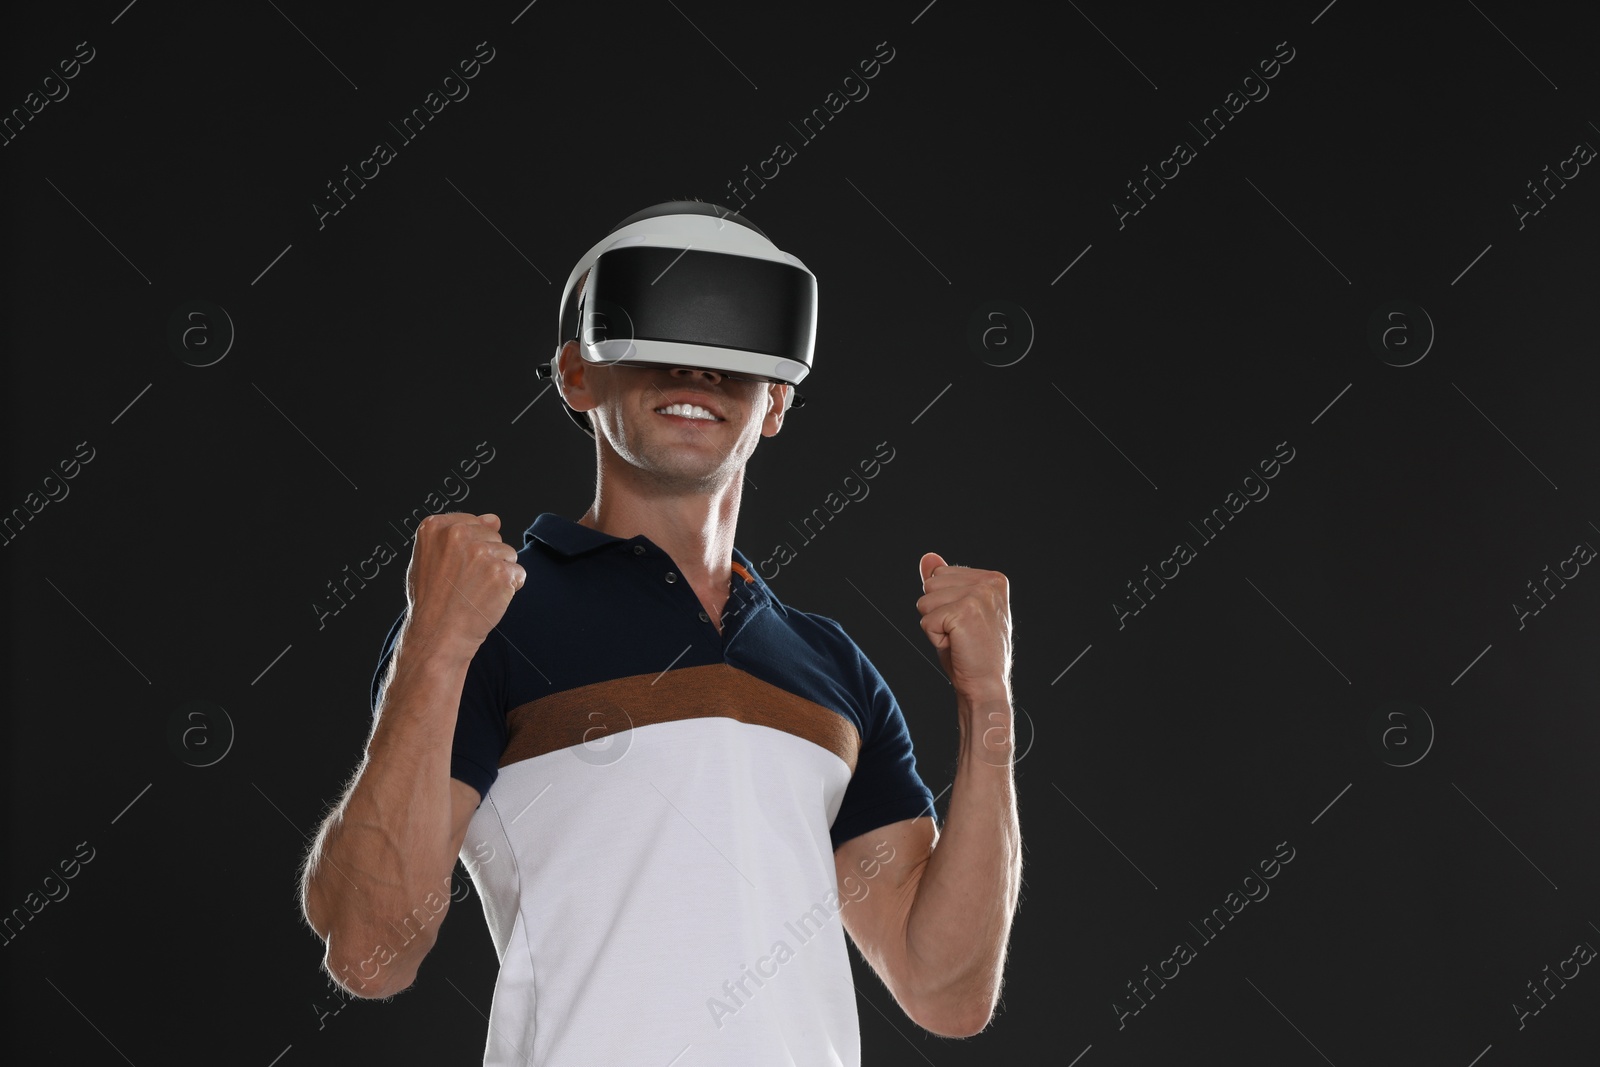 Photo of Smiling man using virtual reality headset on black background, space for text